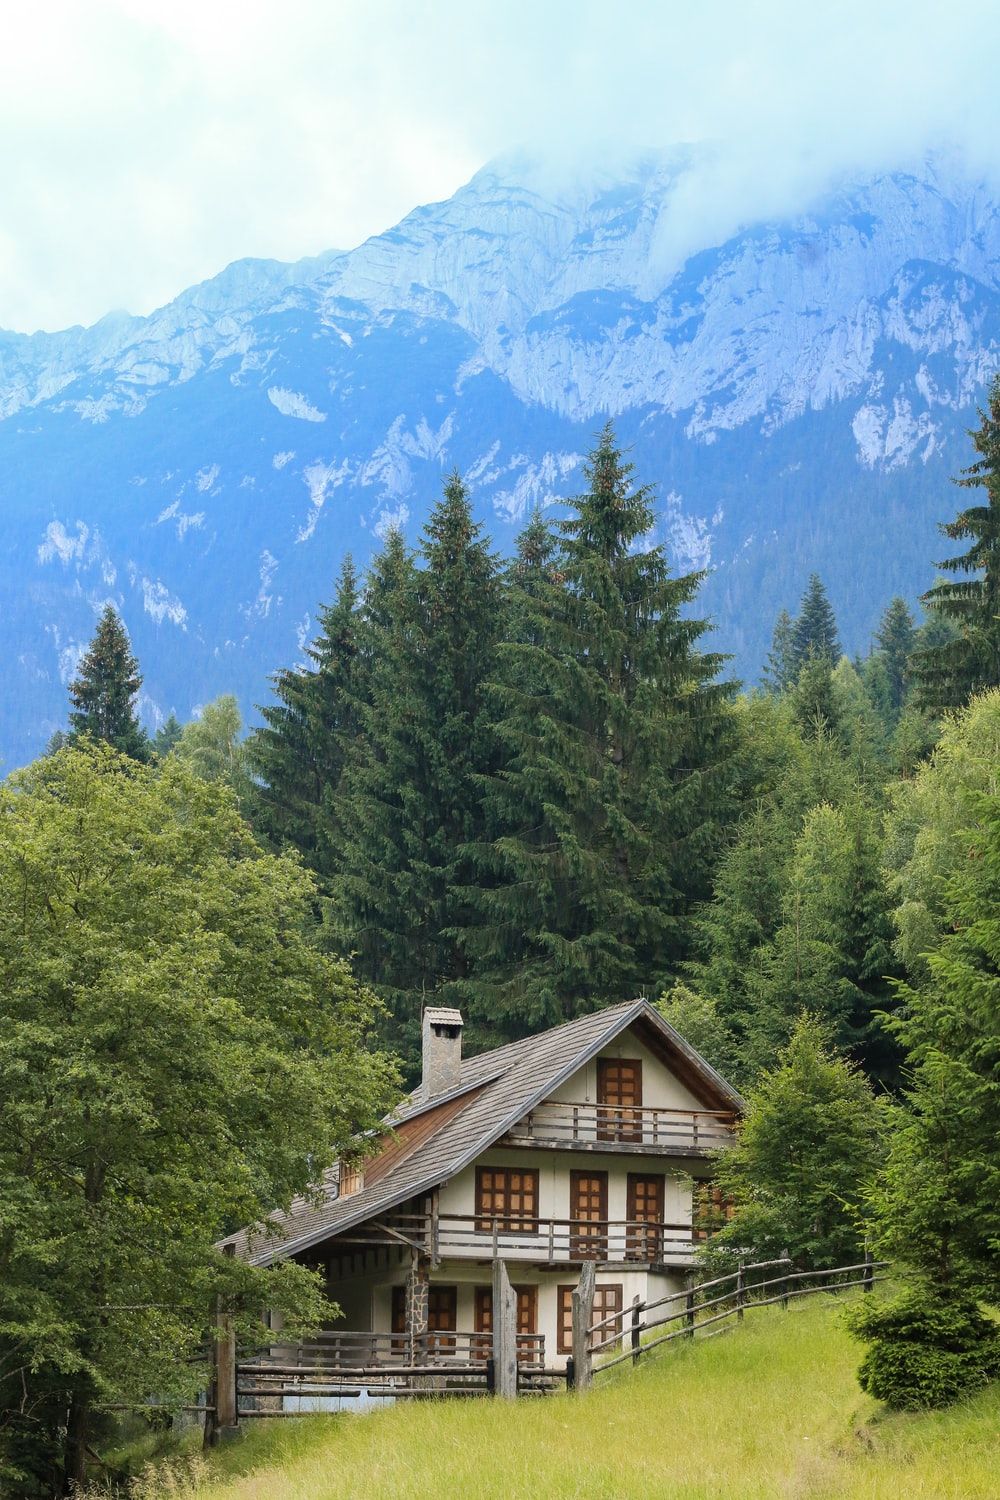 House In The Mountain Picture. Download Free Image